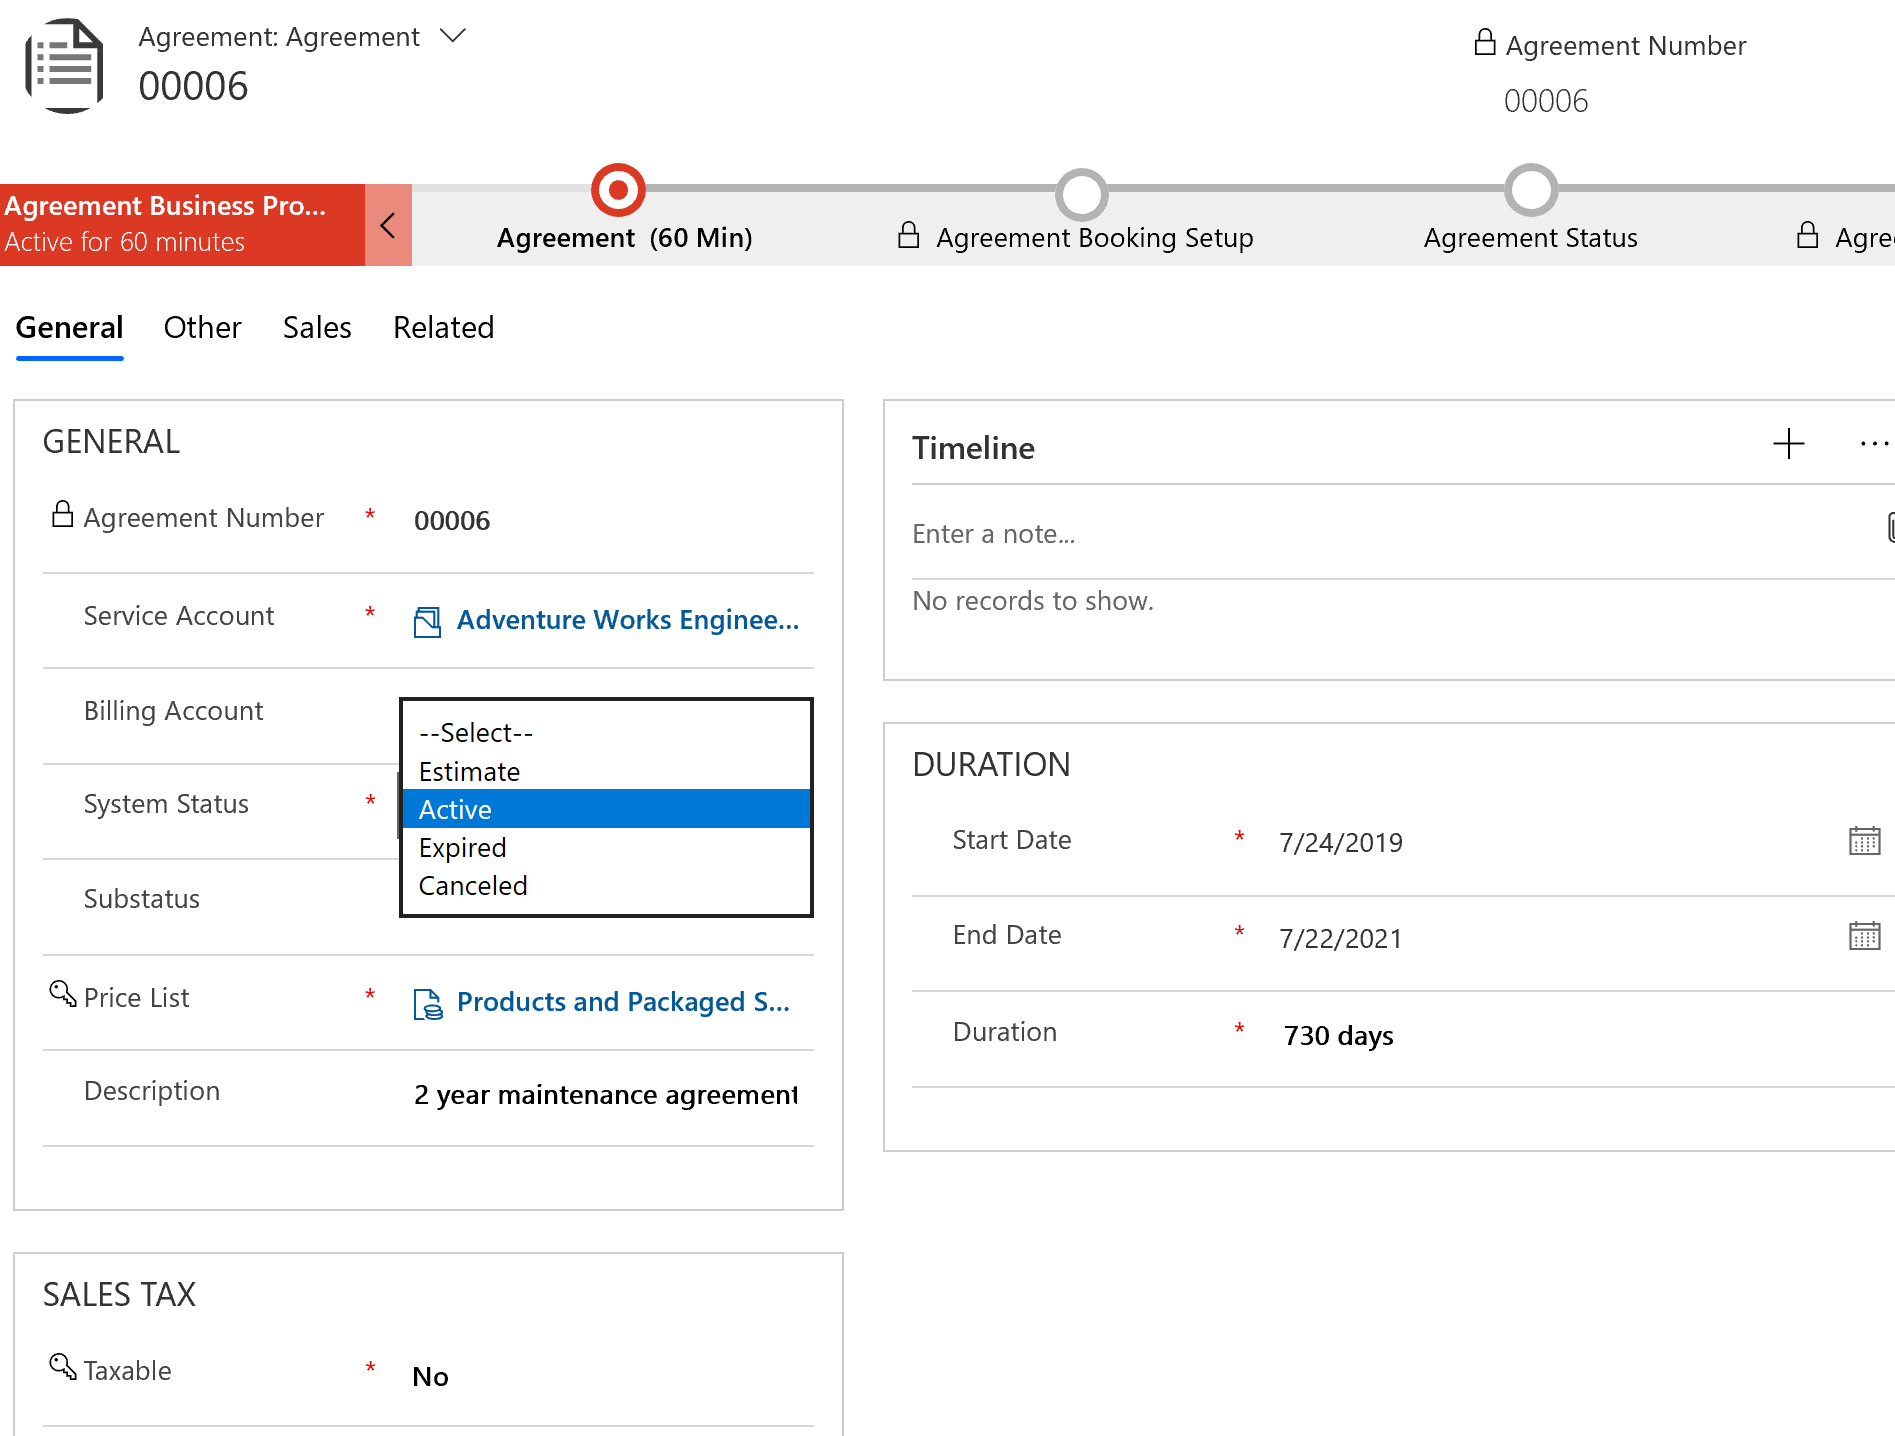 Screenshot of an agreement with the system status set to Active.